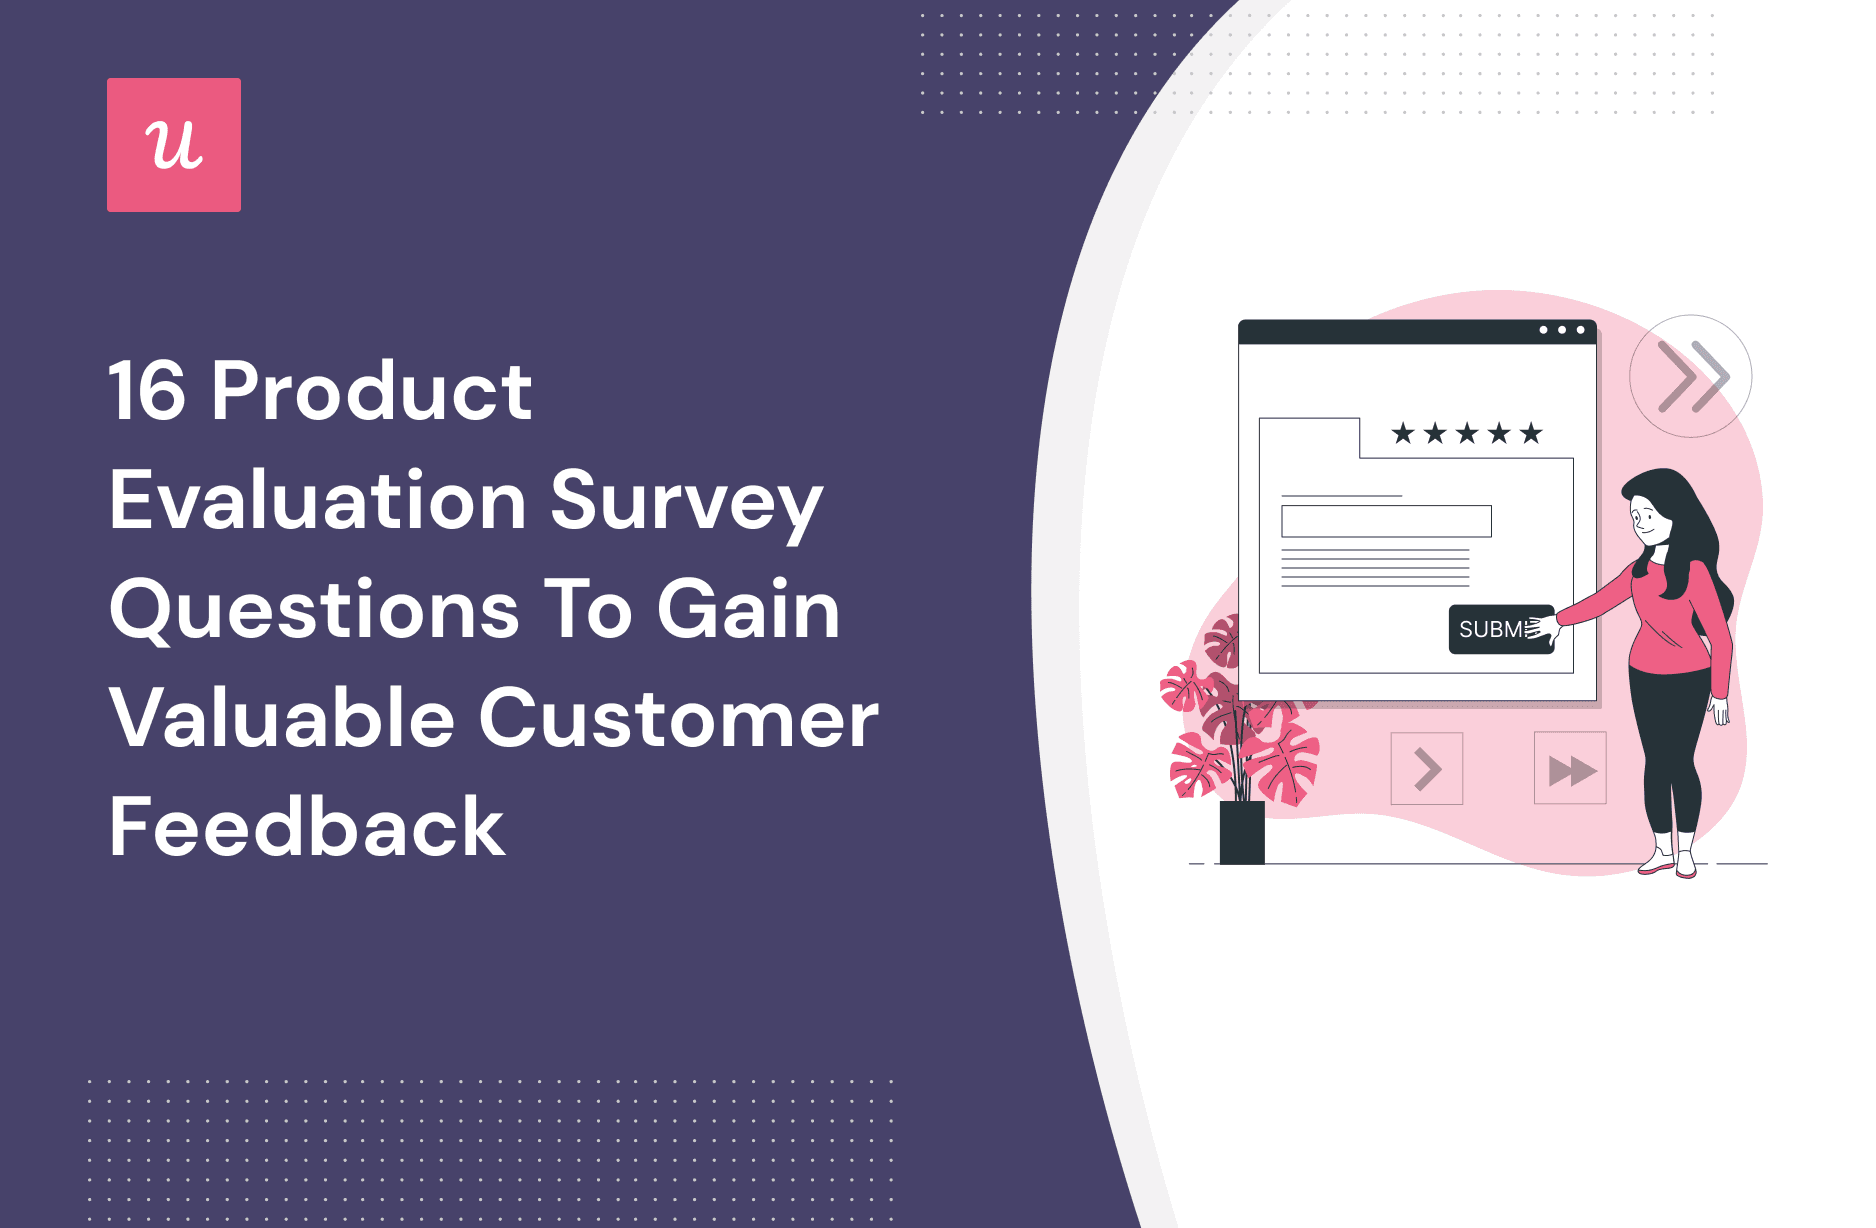 16 Product Evaluation Survey Questions to Gain Valuable Customer Feedback cover